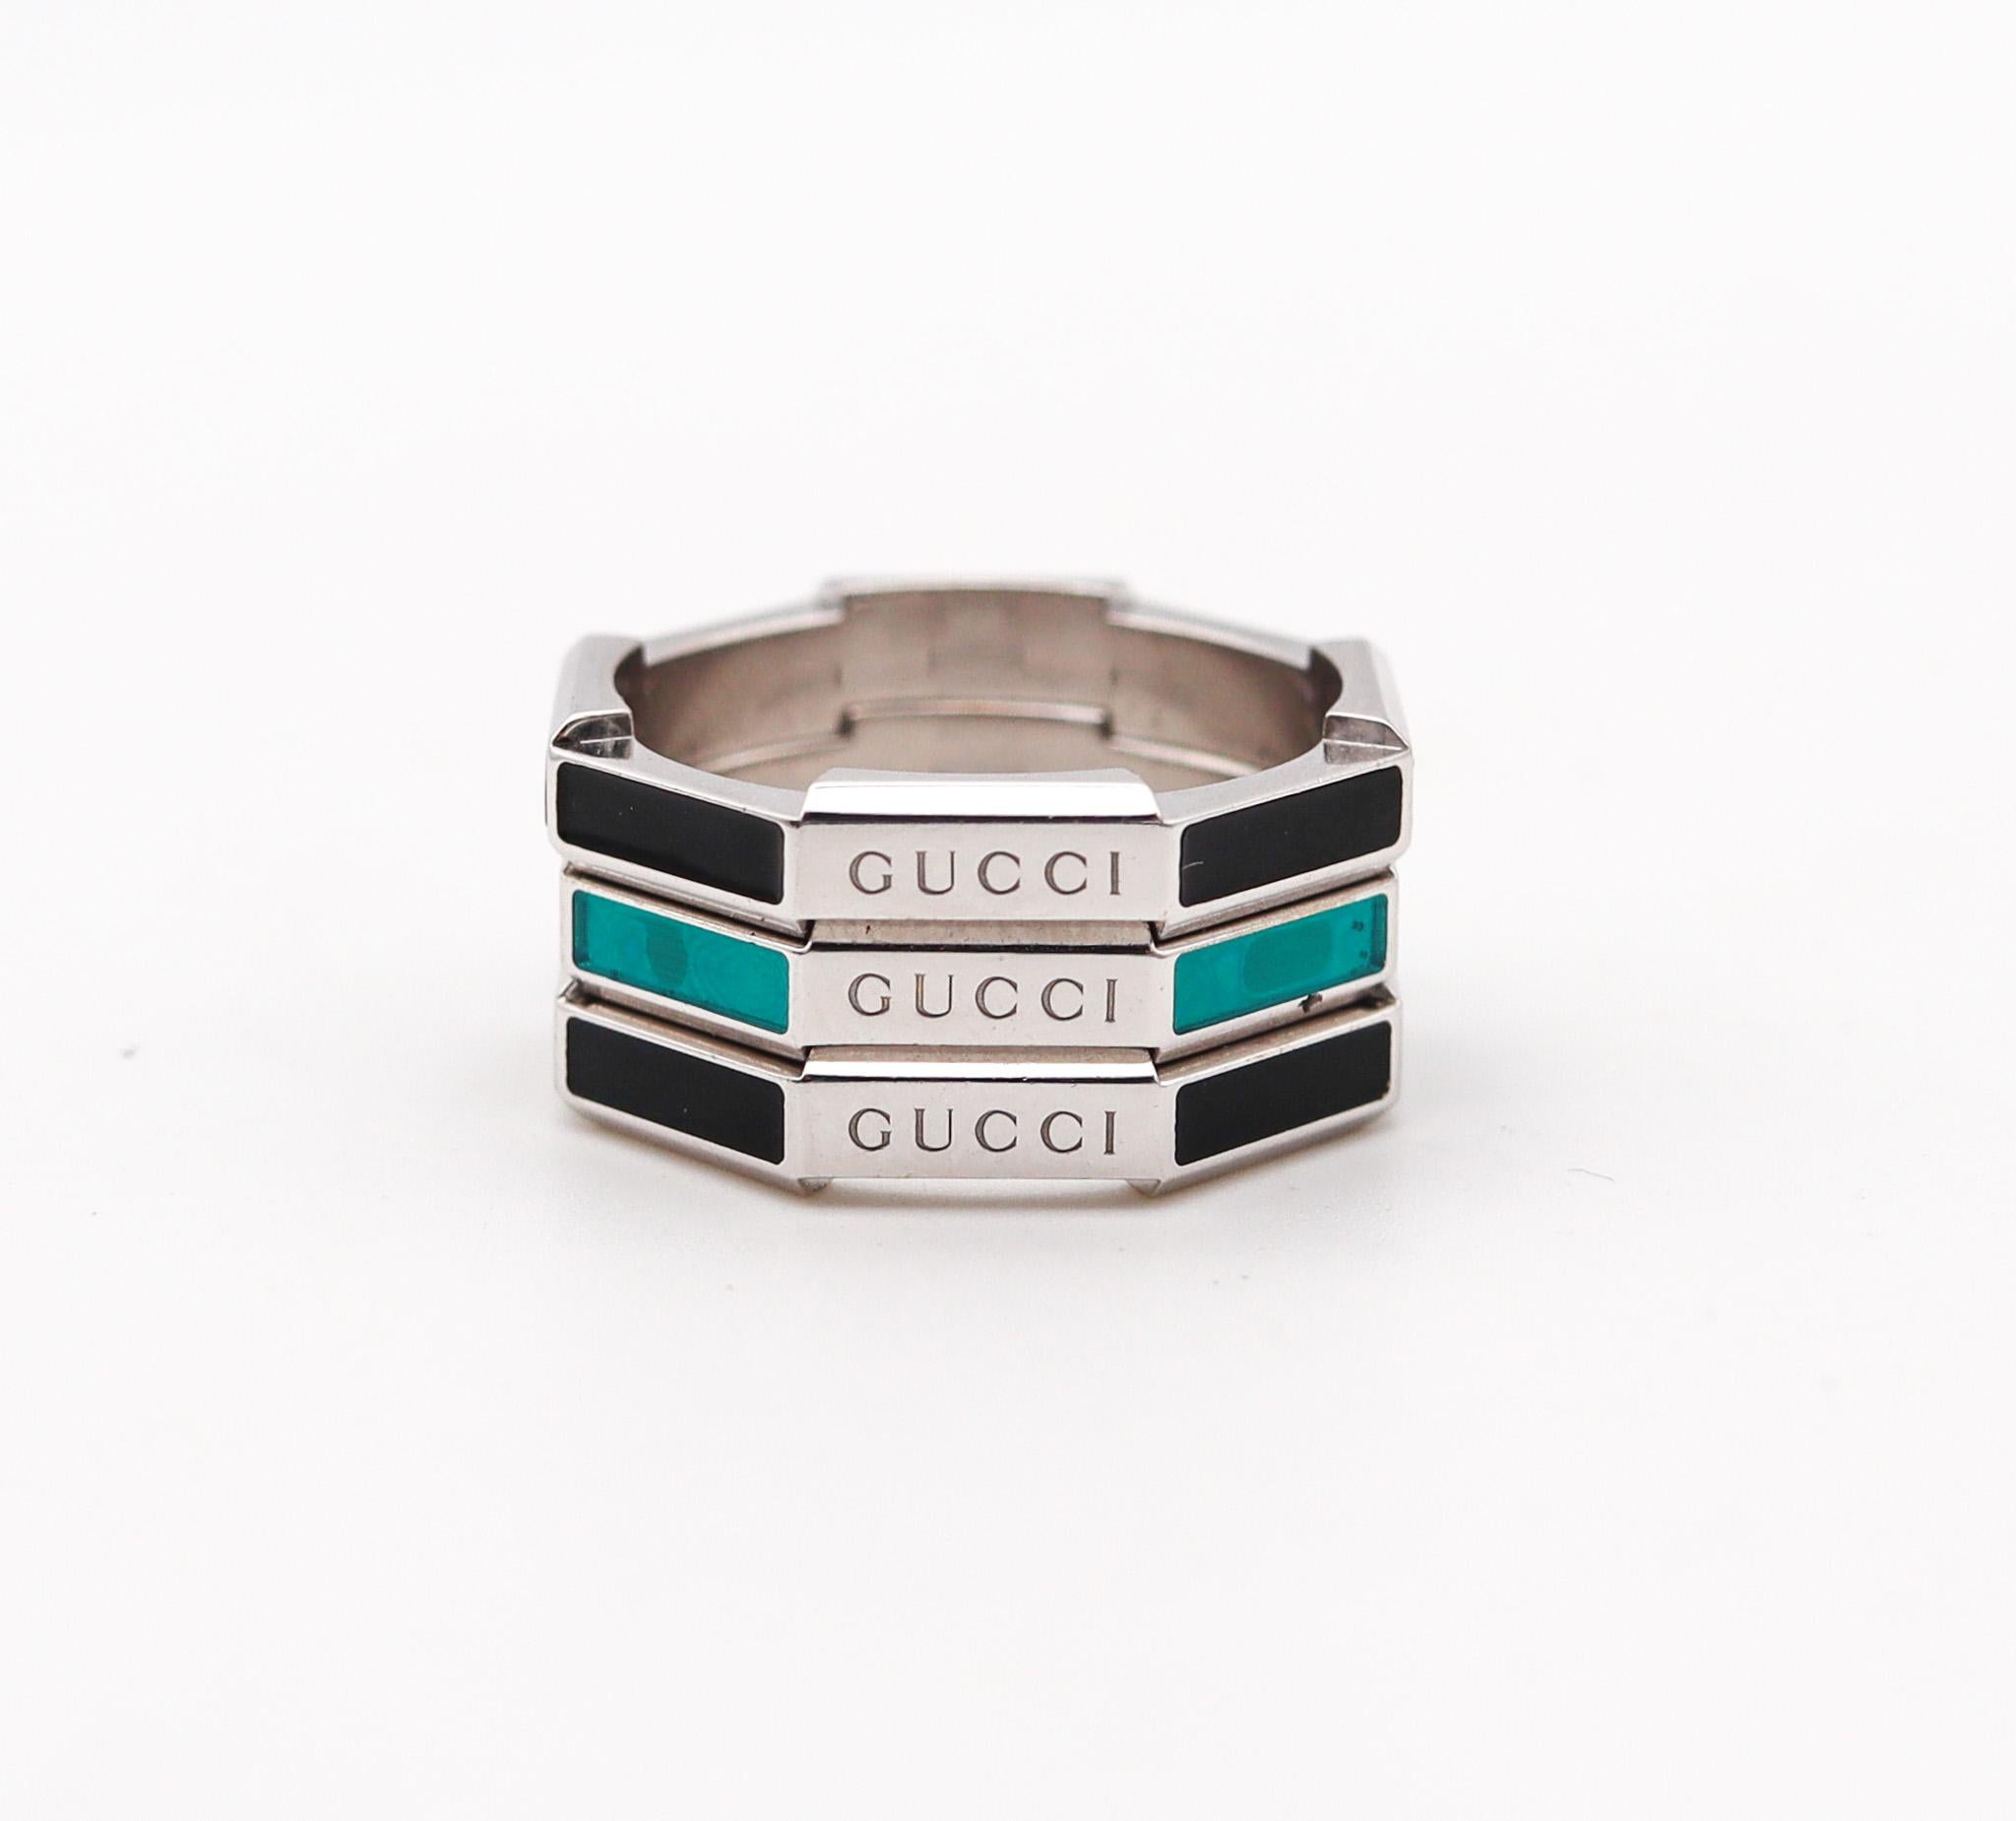 Links to love trio stackable rings designed by Gucci.

These models are one of the ultimate jewelry pieces by this Italian fashion Maison. A beautiful trio of rings from the collection named Links To Love, created in Milano Italy by the house of